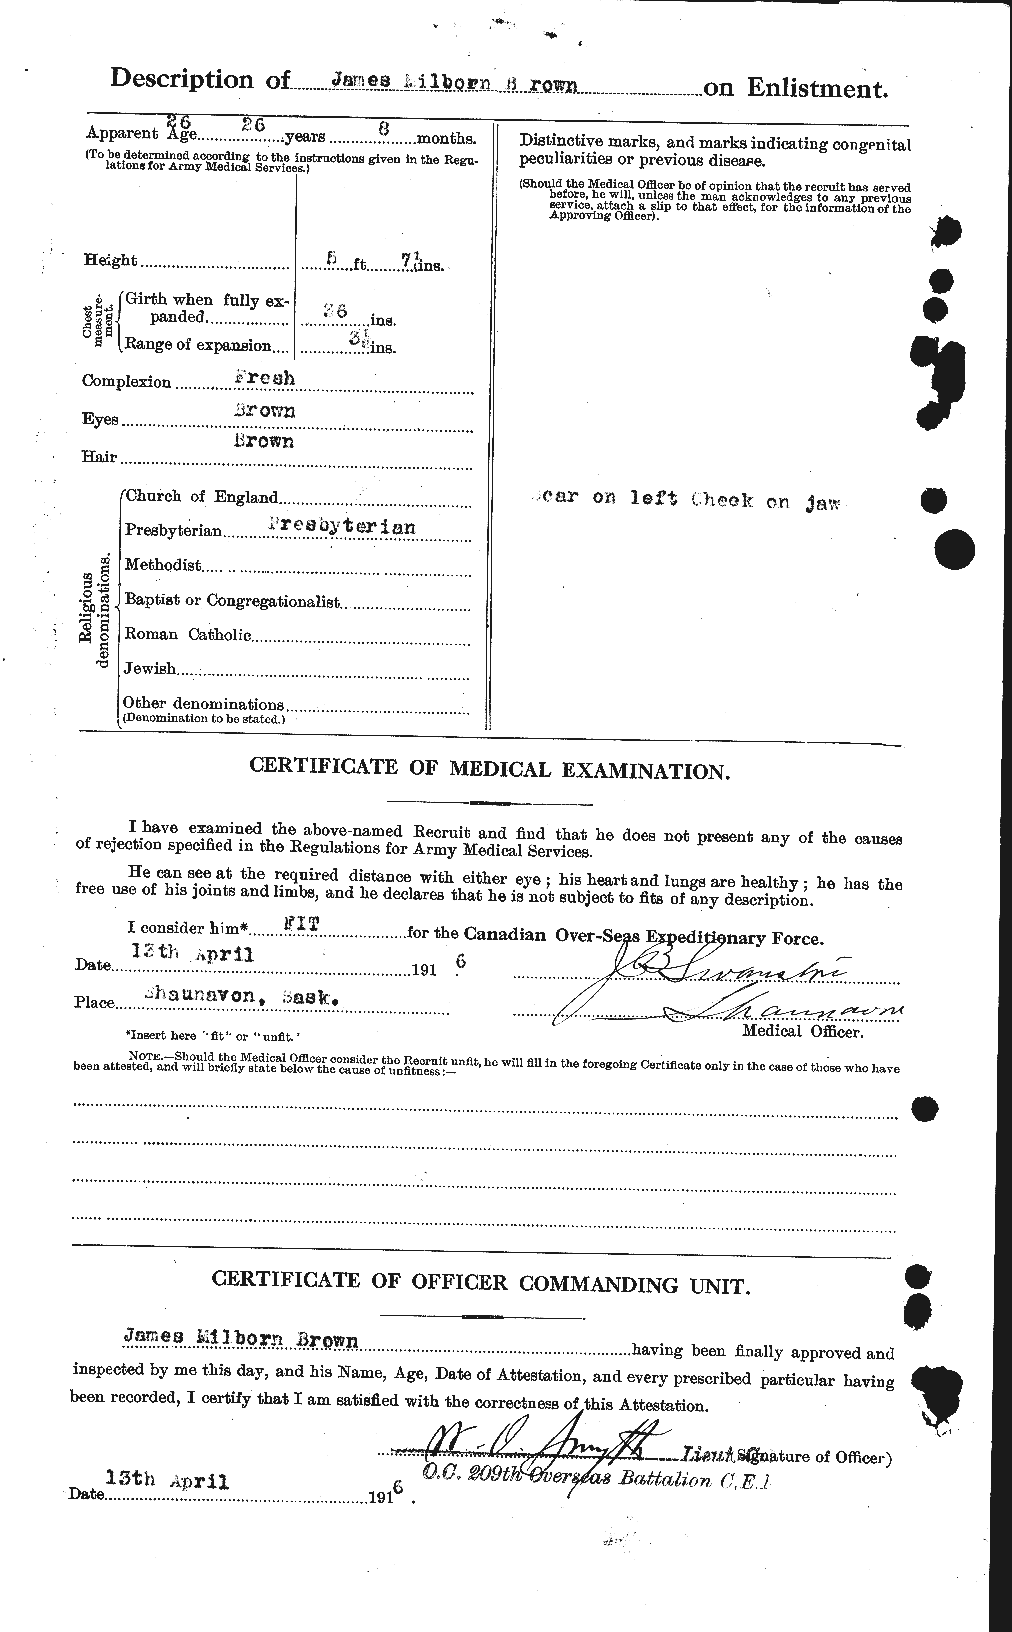 Personnel Records of the First World War - CEF 269557b